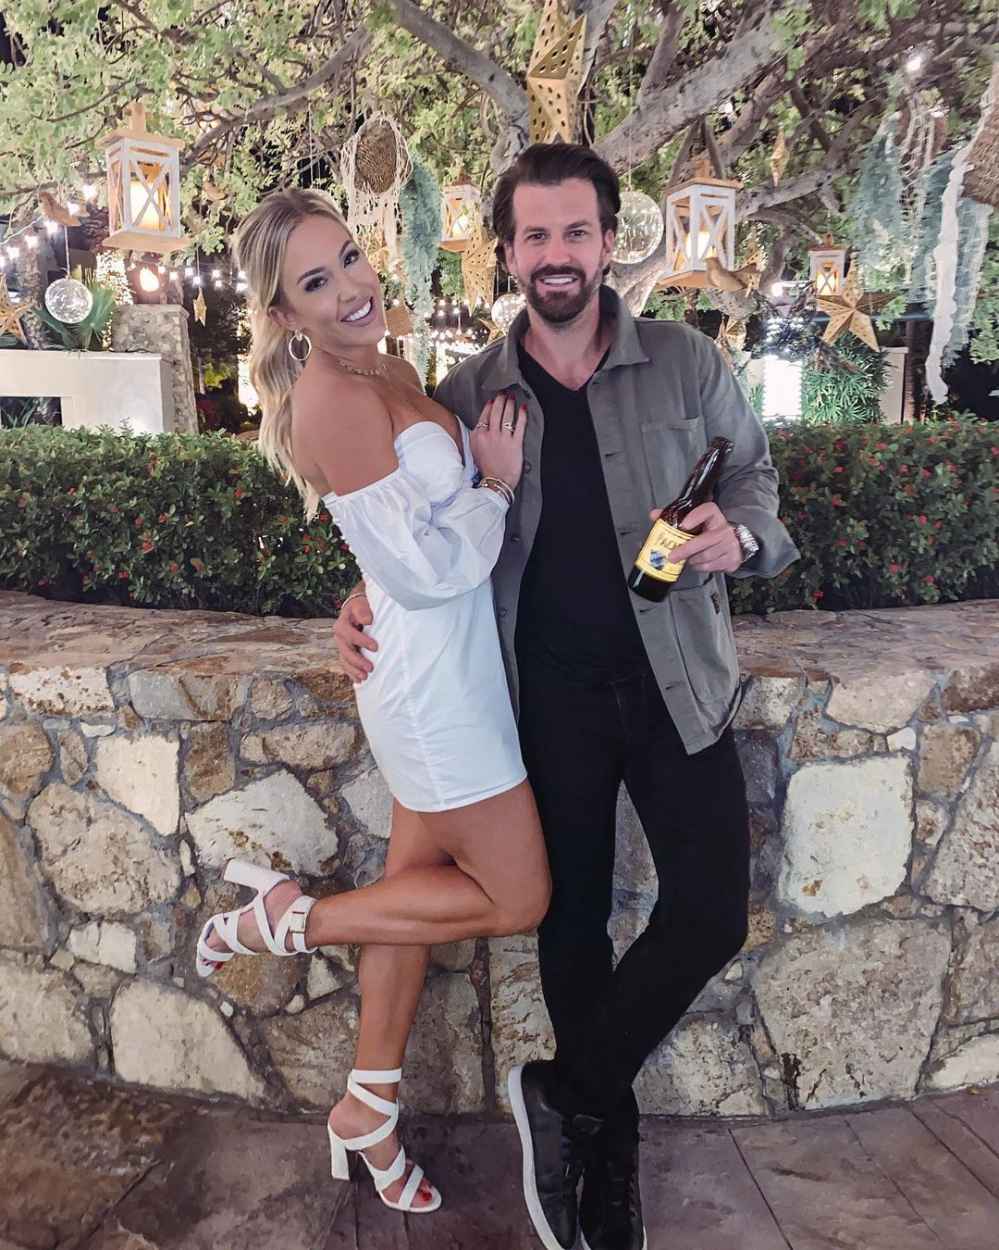 The Challenges Morgan Willett Claims Johnny Bananas Cheated